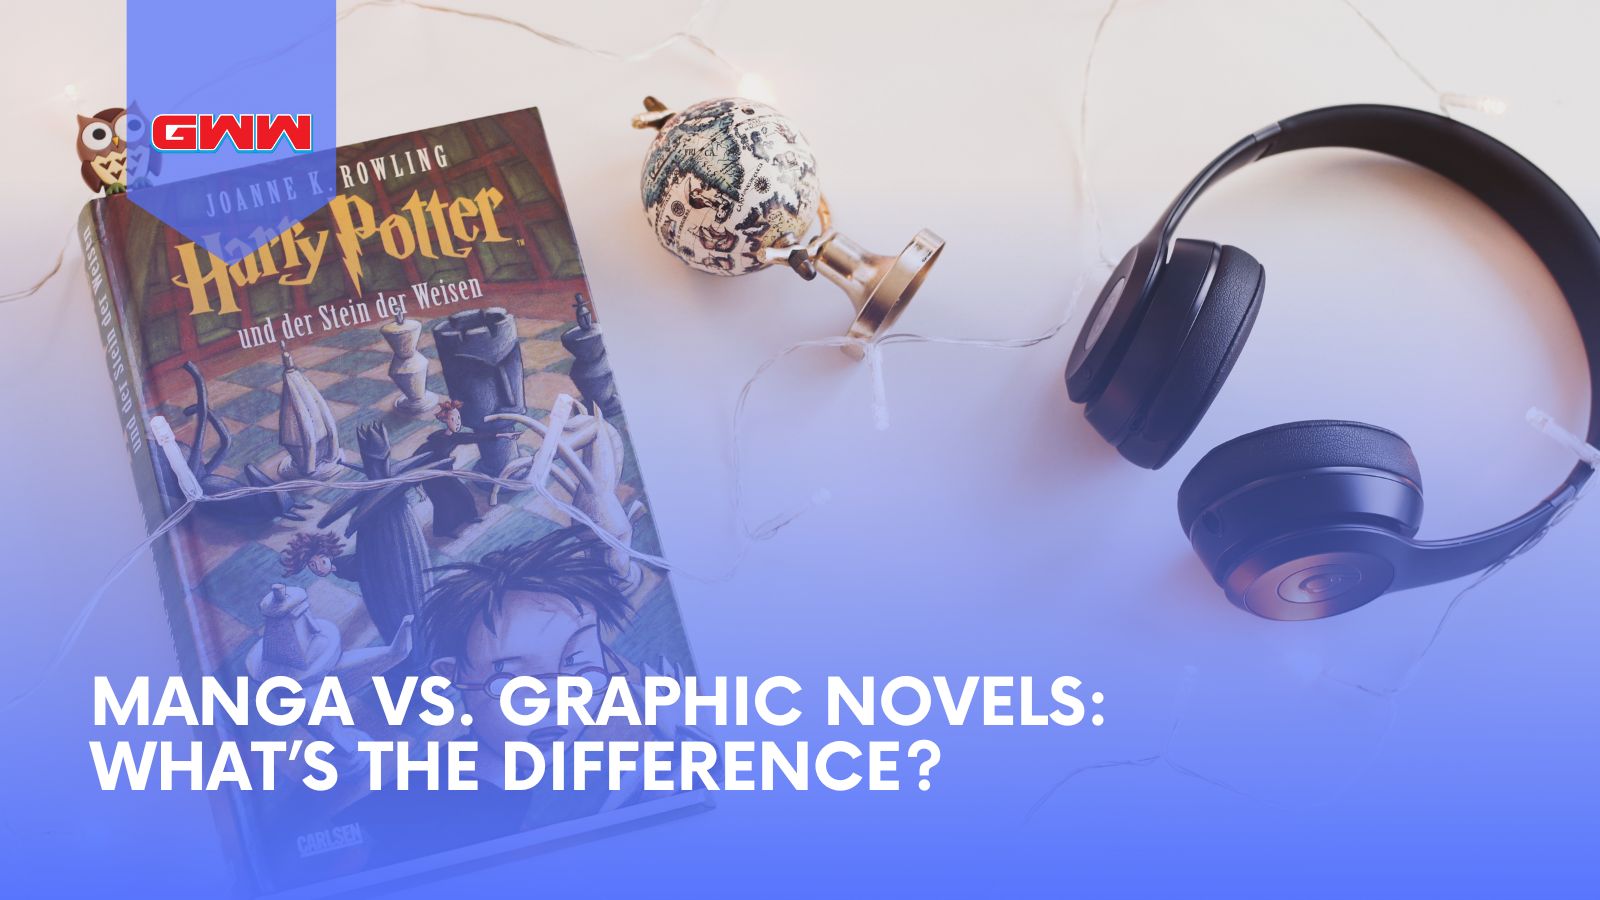 Manga vs. Graphic Novels: What’s the Difference?